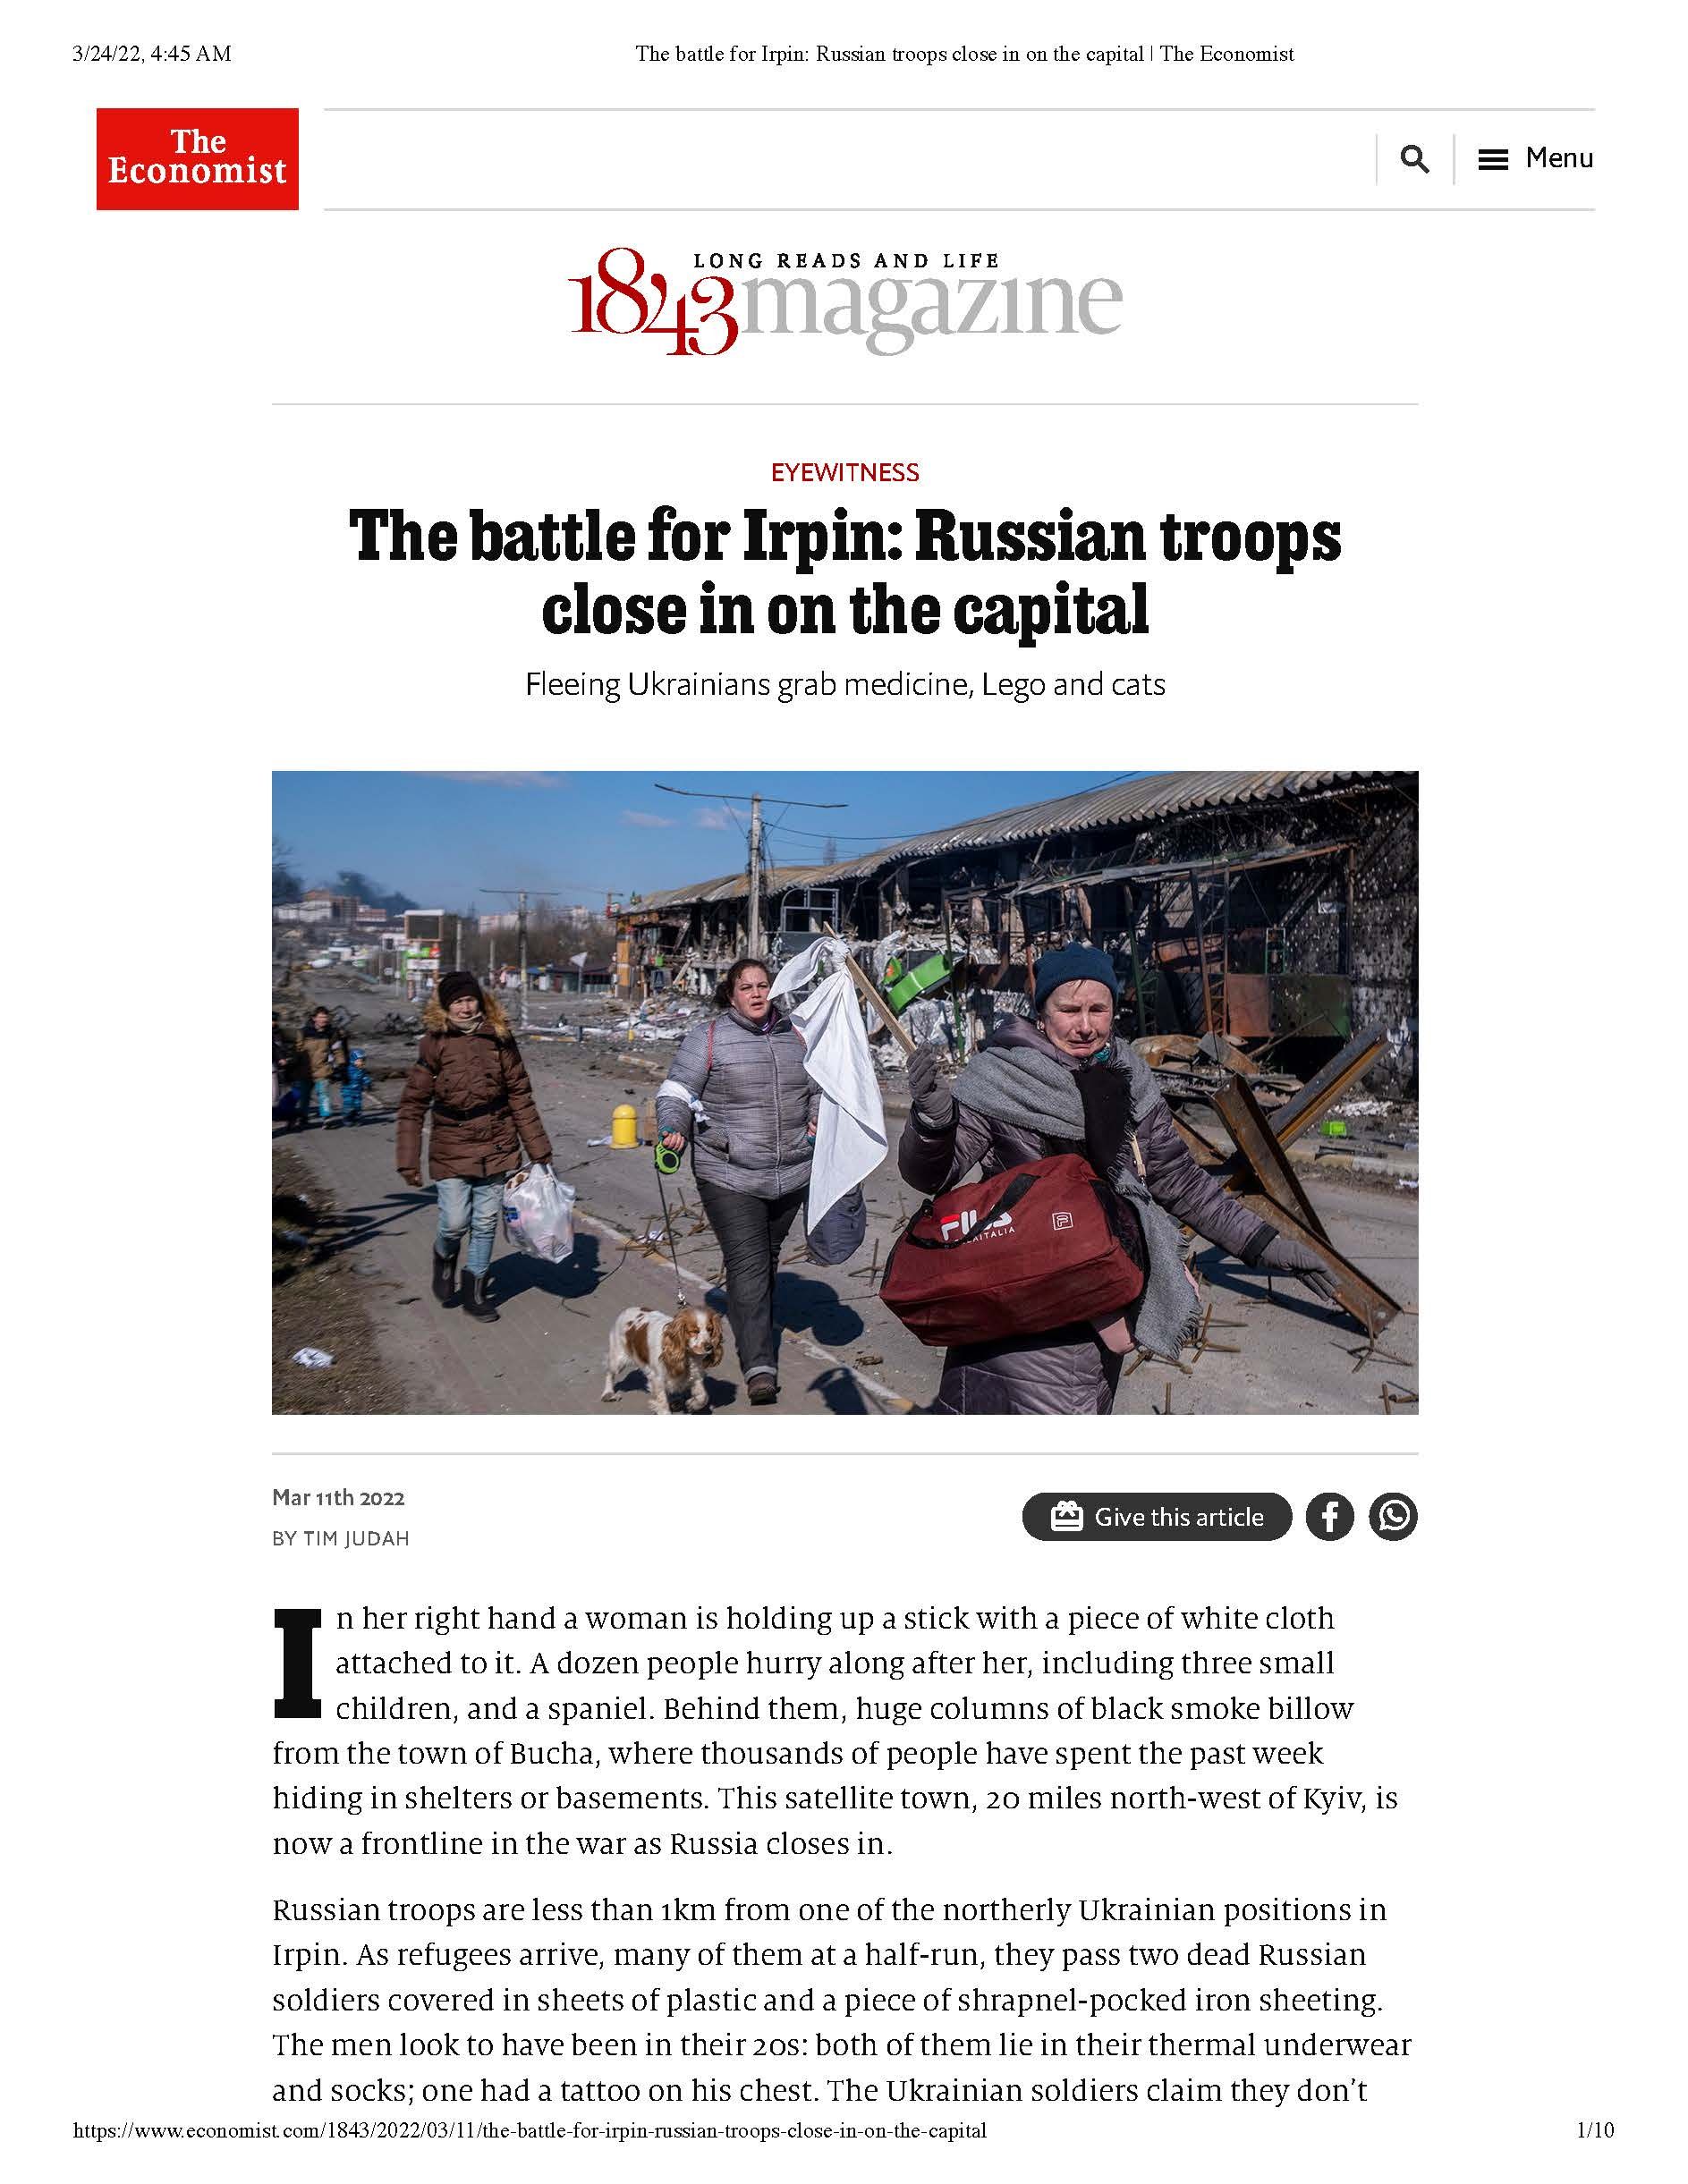 The battle for Irpin